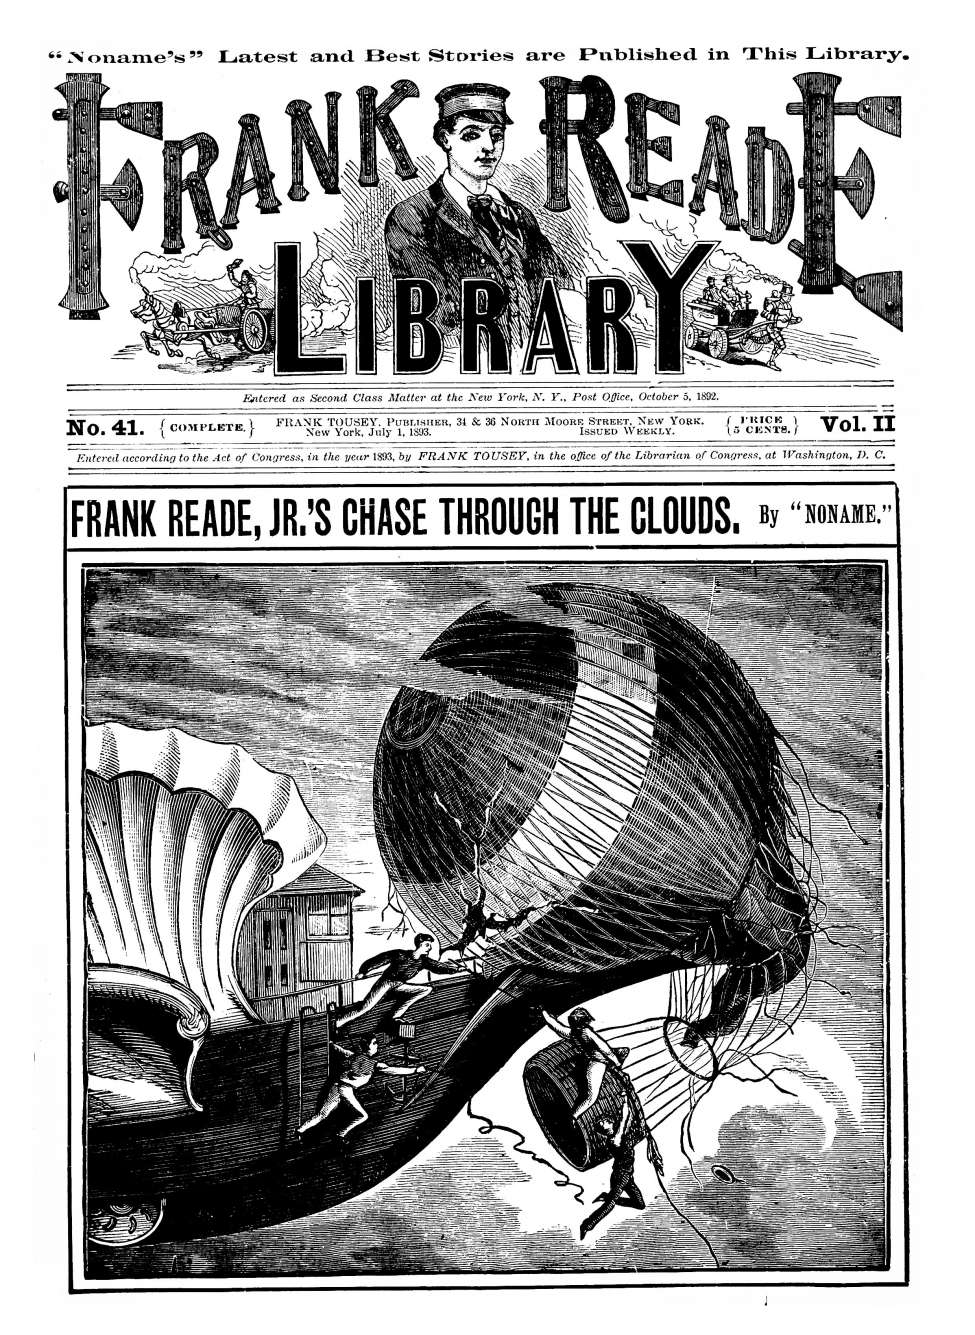 Comic Book Cover For v02 41 - Frank Reade, Jr.s, Chase Through the Clouds